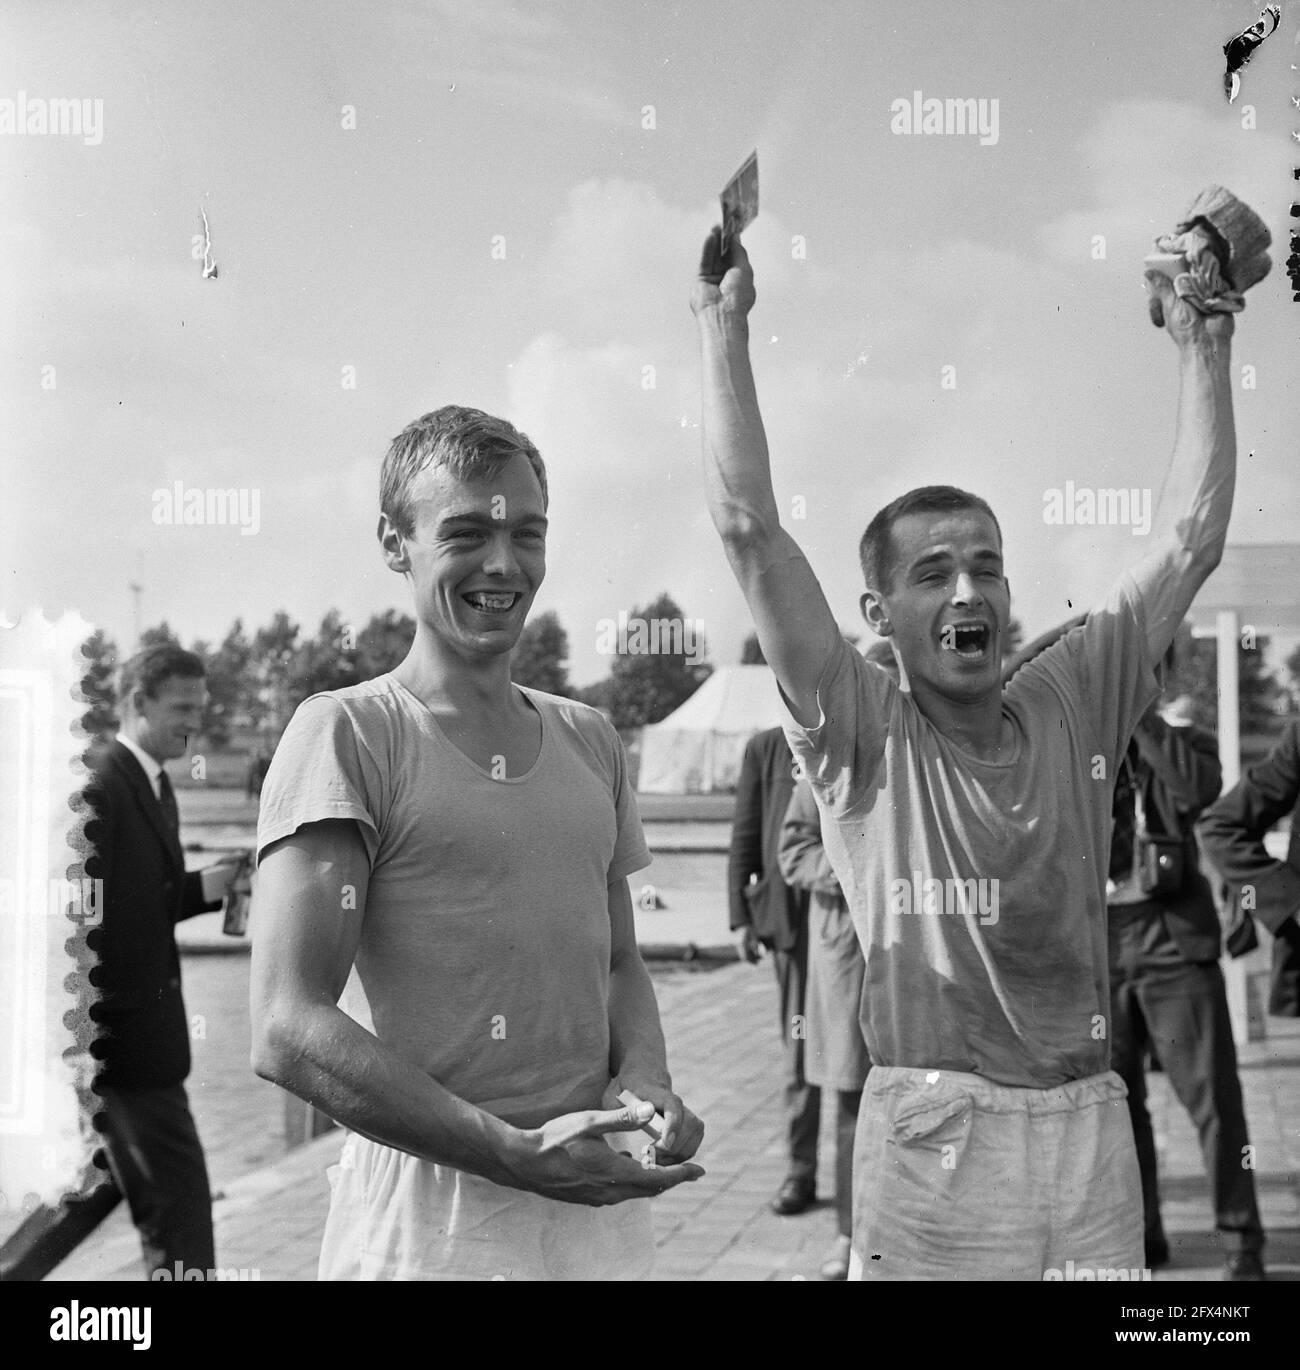 European rowing championships Bosbaan, cheering Venemans and Blaisse, August 9, 1964, Rowing, championships, The Netherlands, 20th century press agency photo, news to remember, documentary, historic photography 1945-1990, visual stories, human history of the Twentieth Century, capturing moments in time Stock Photo